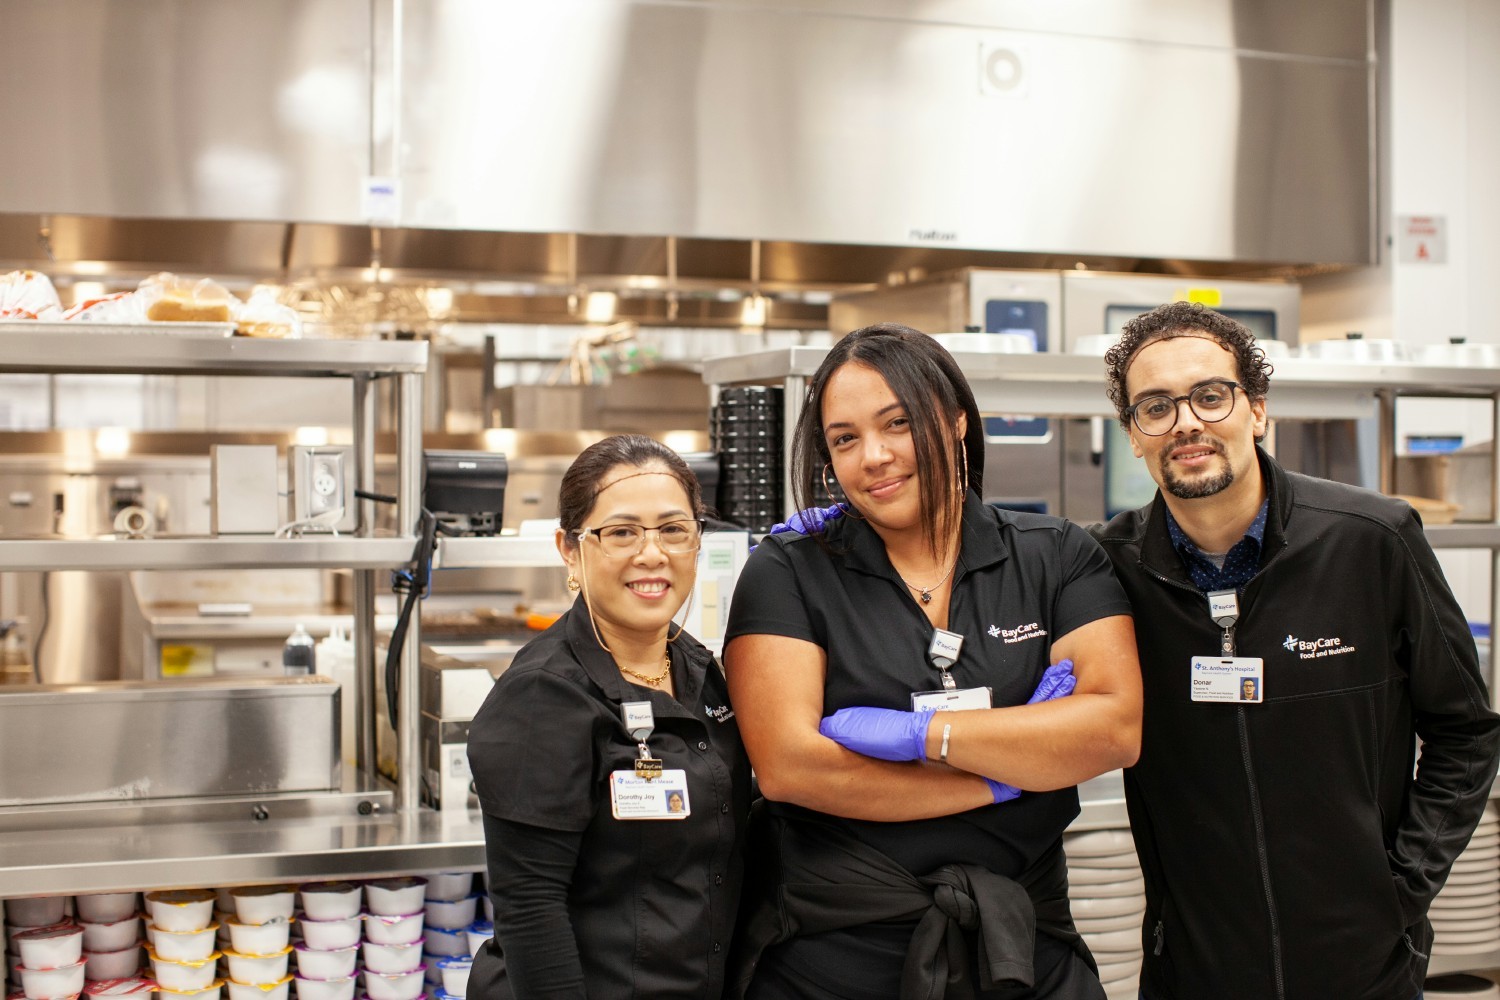 BayCare's Food Services Team know access to healthy food is an essential part of the healing process for our patients.